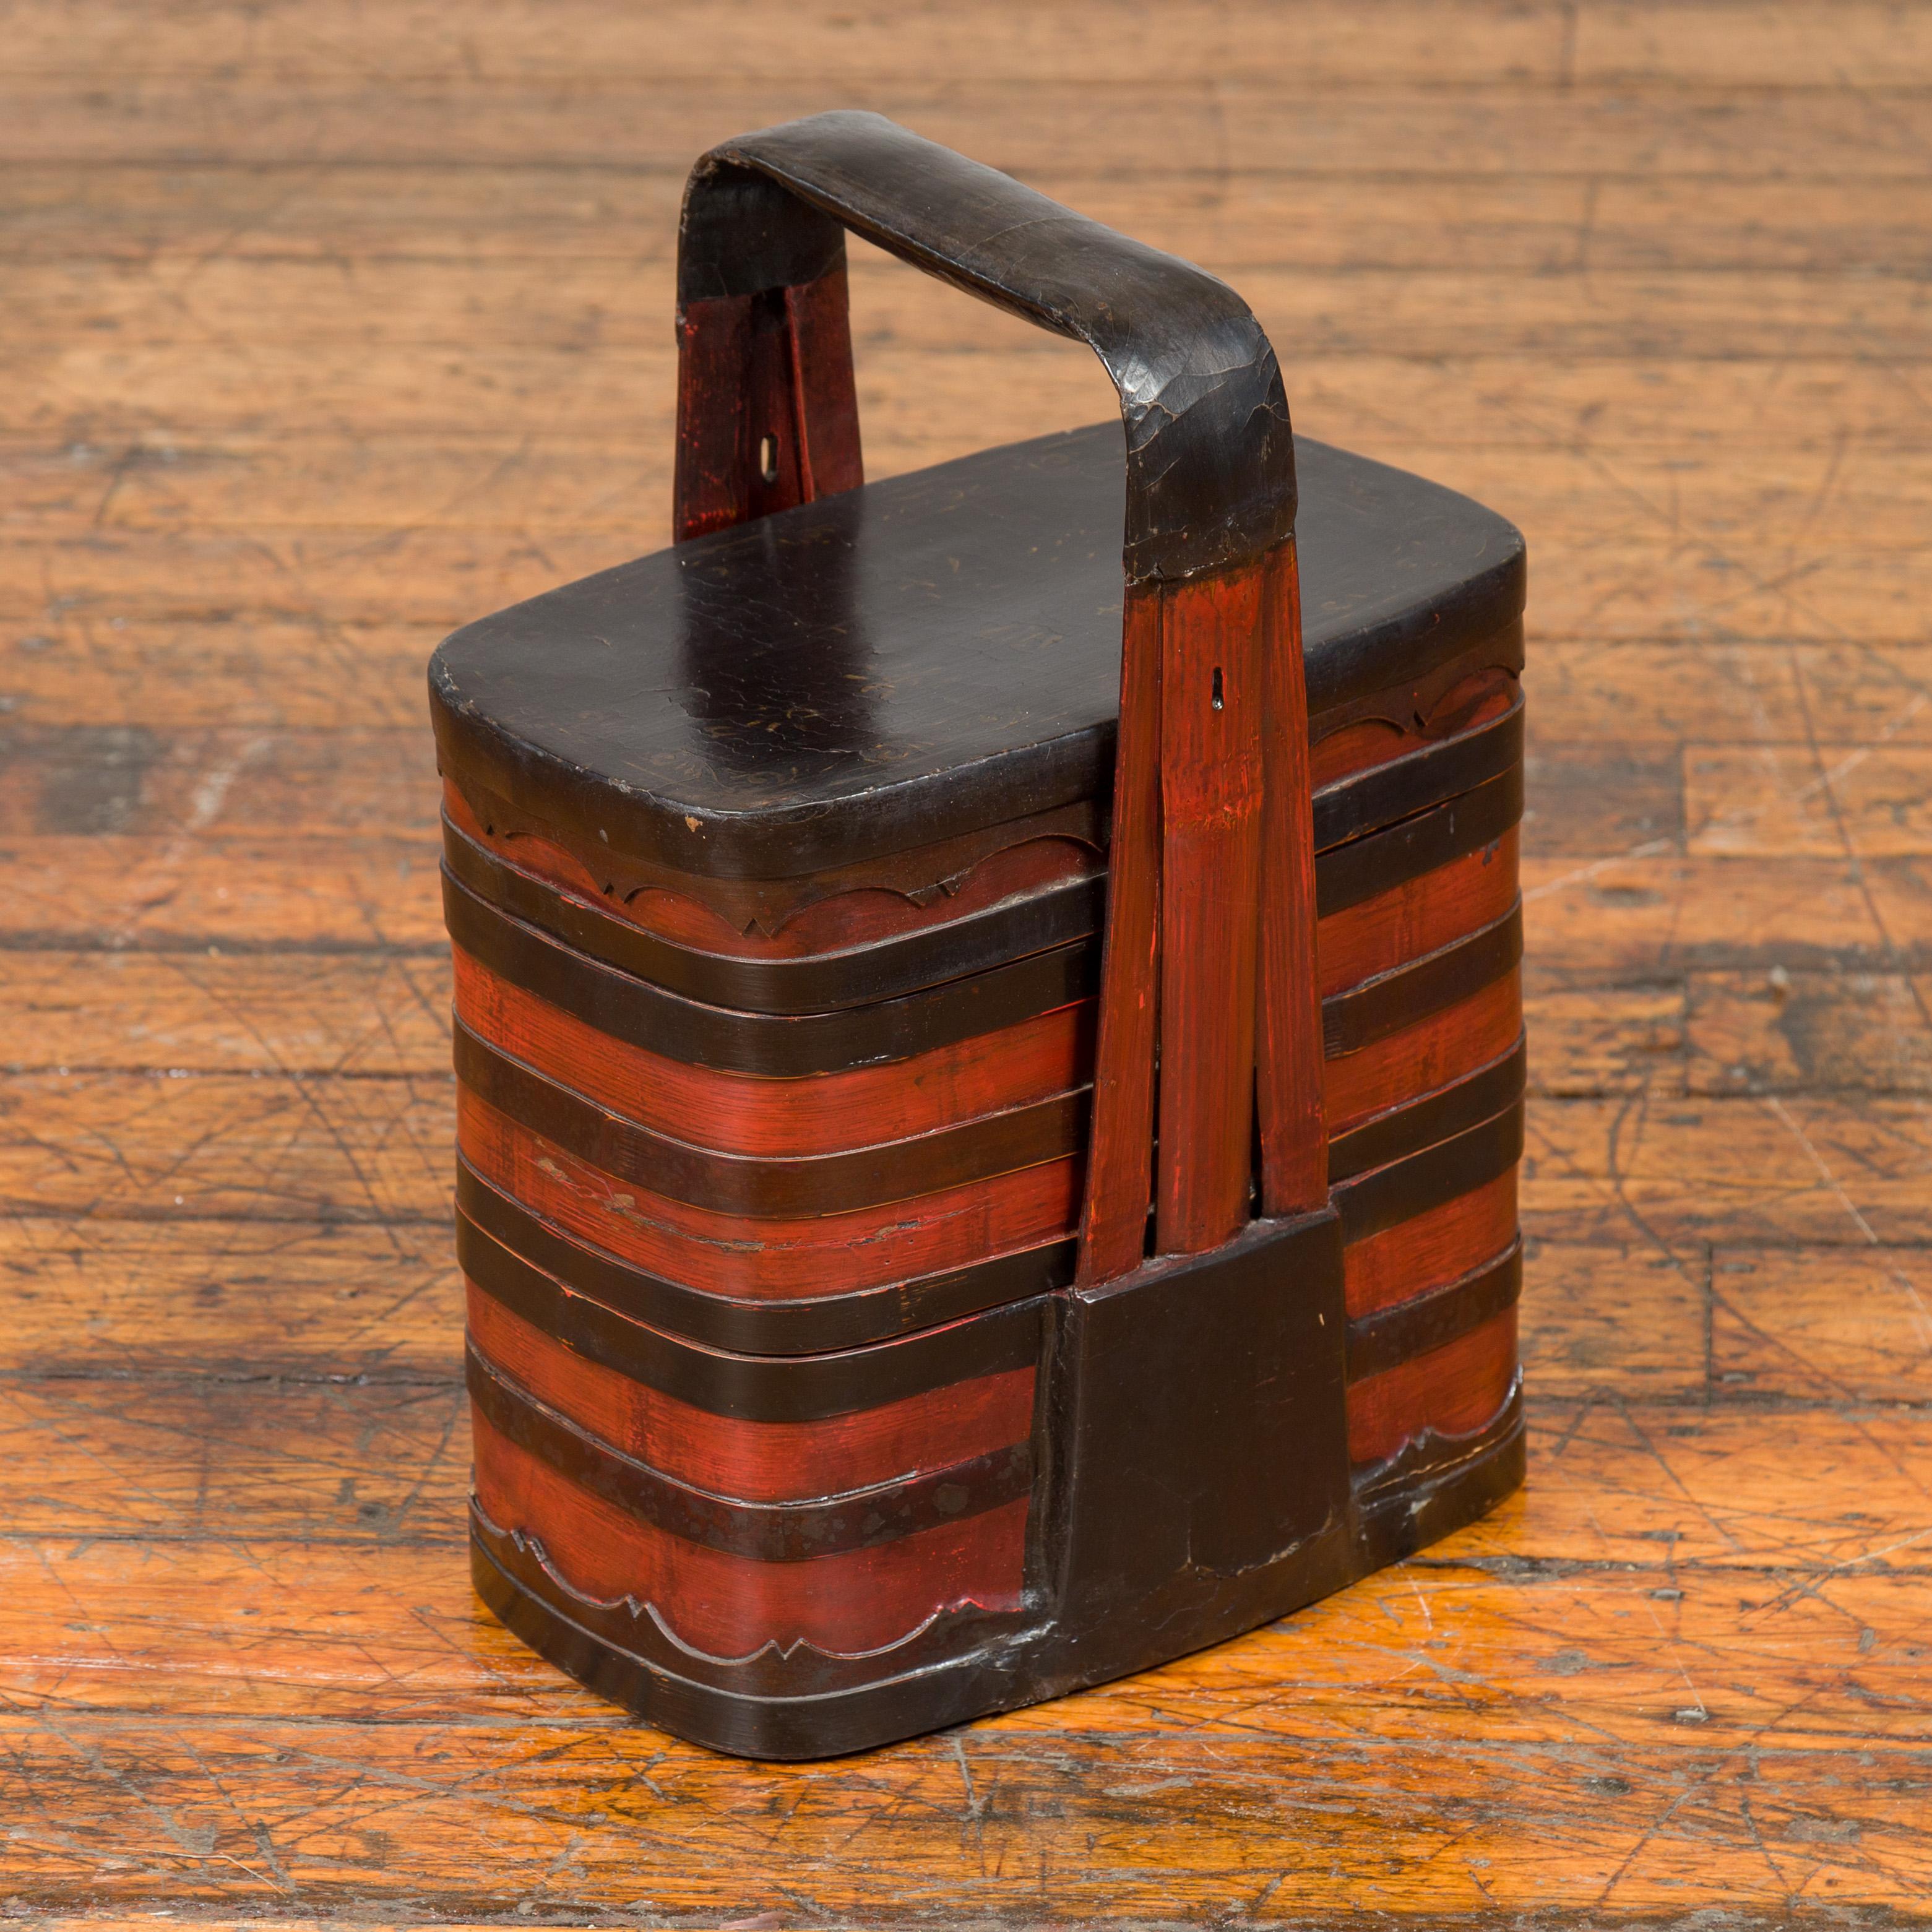 A Chinese antique red and black lacquered tiered lunch box from the early 20th century, with large handle and calligraphy. Crafted in China during the early years of the 20th century, this tiered lunch box features a black lid adorned with painted